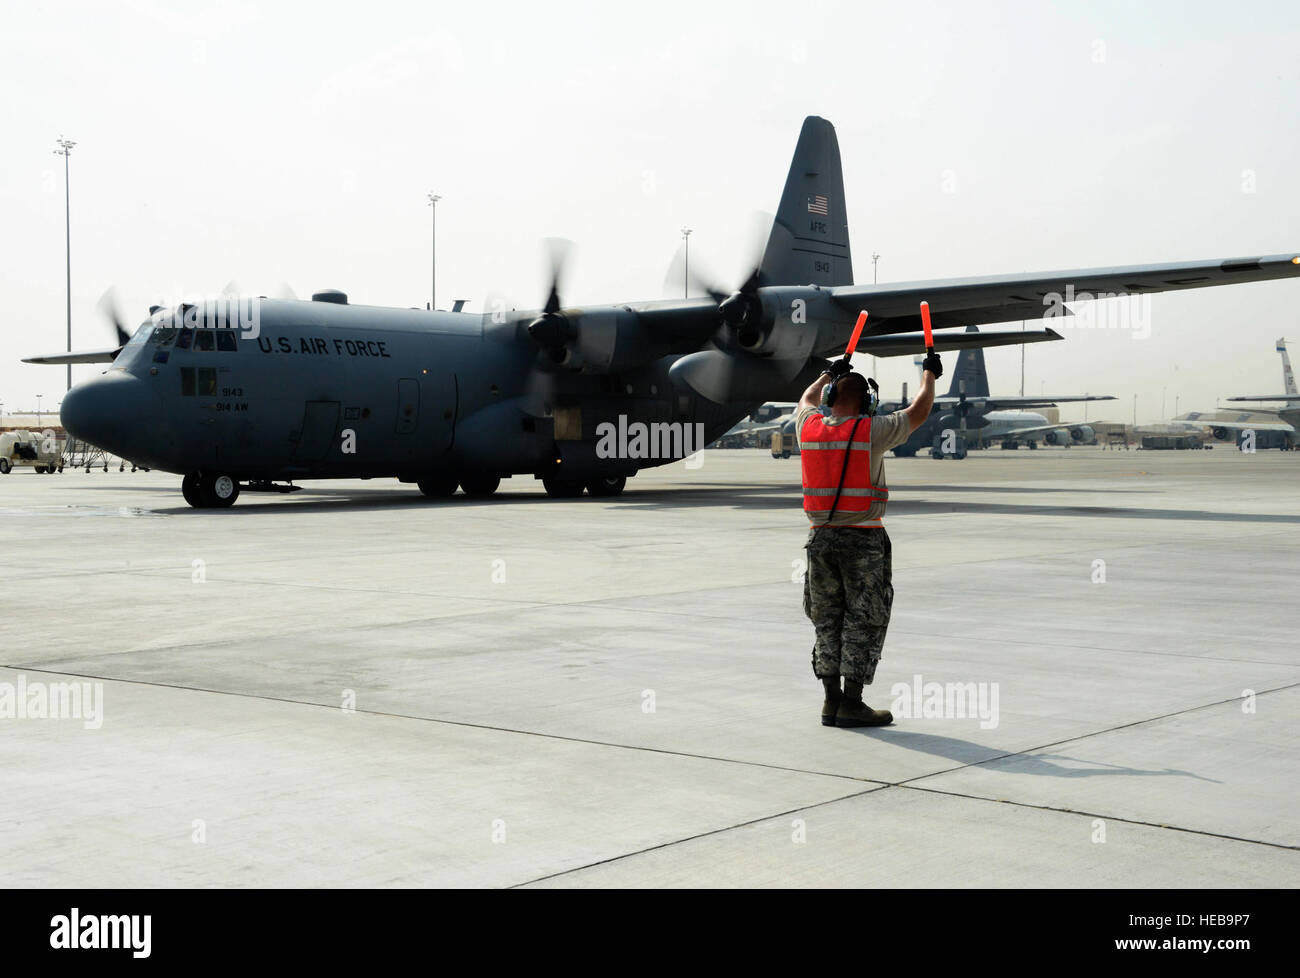 Senior Airman Steven Engels, 379th Expeditionary Aircraft Maintenance Squadron crew chief, marshals a C-130 Hercules on the flight line June 28, 2016, at Al Udeid Air Base, Qatar. Airmen from the 379th EAMXS are responsible for ensuring the aircraft are maintained to exact standards to support Operation Inherent Resolve and Operations Freedom’s Sentinel. Senior Airman Janelle Patiño Stock Photo